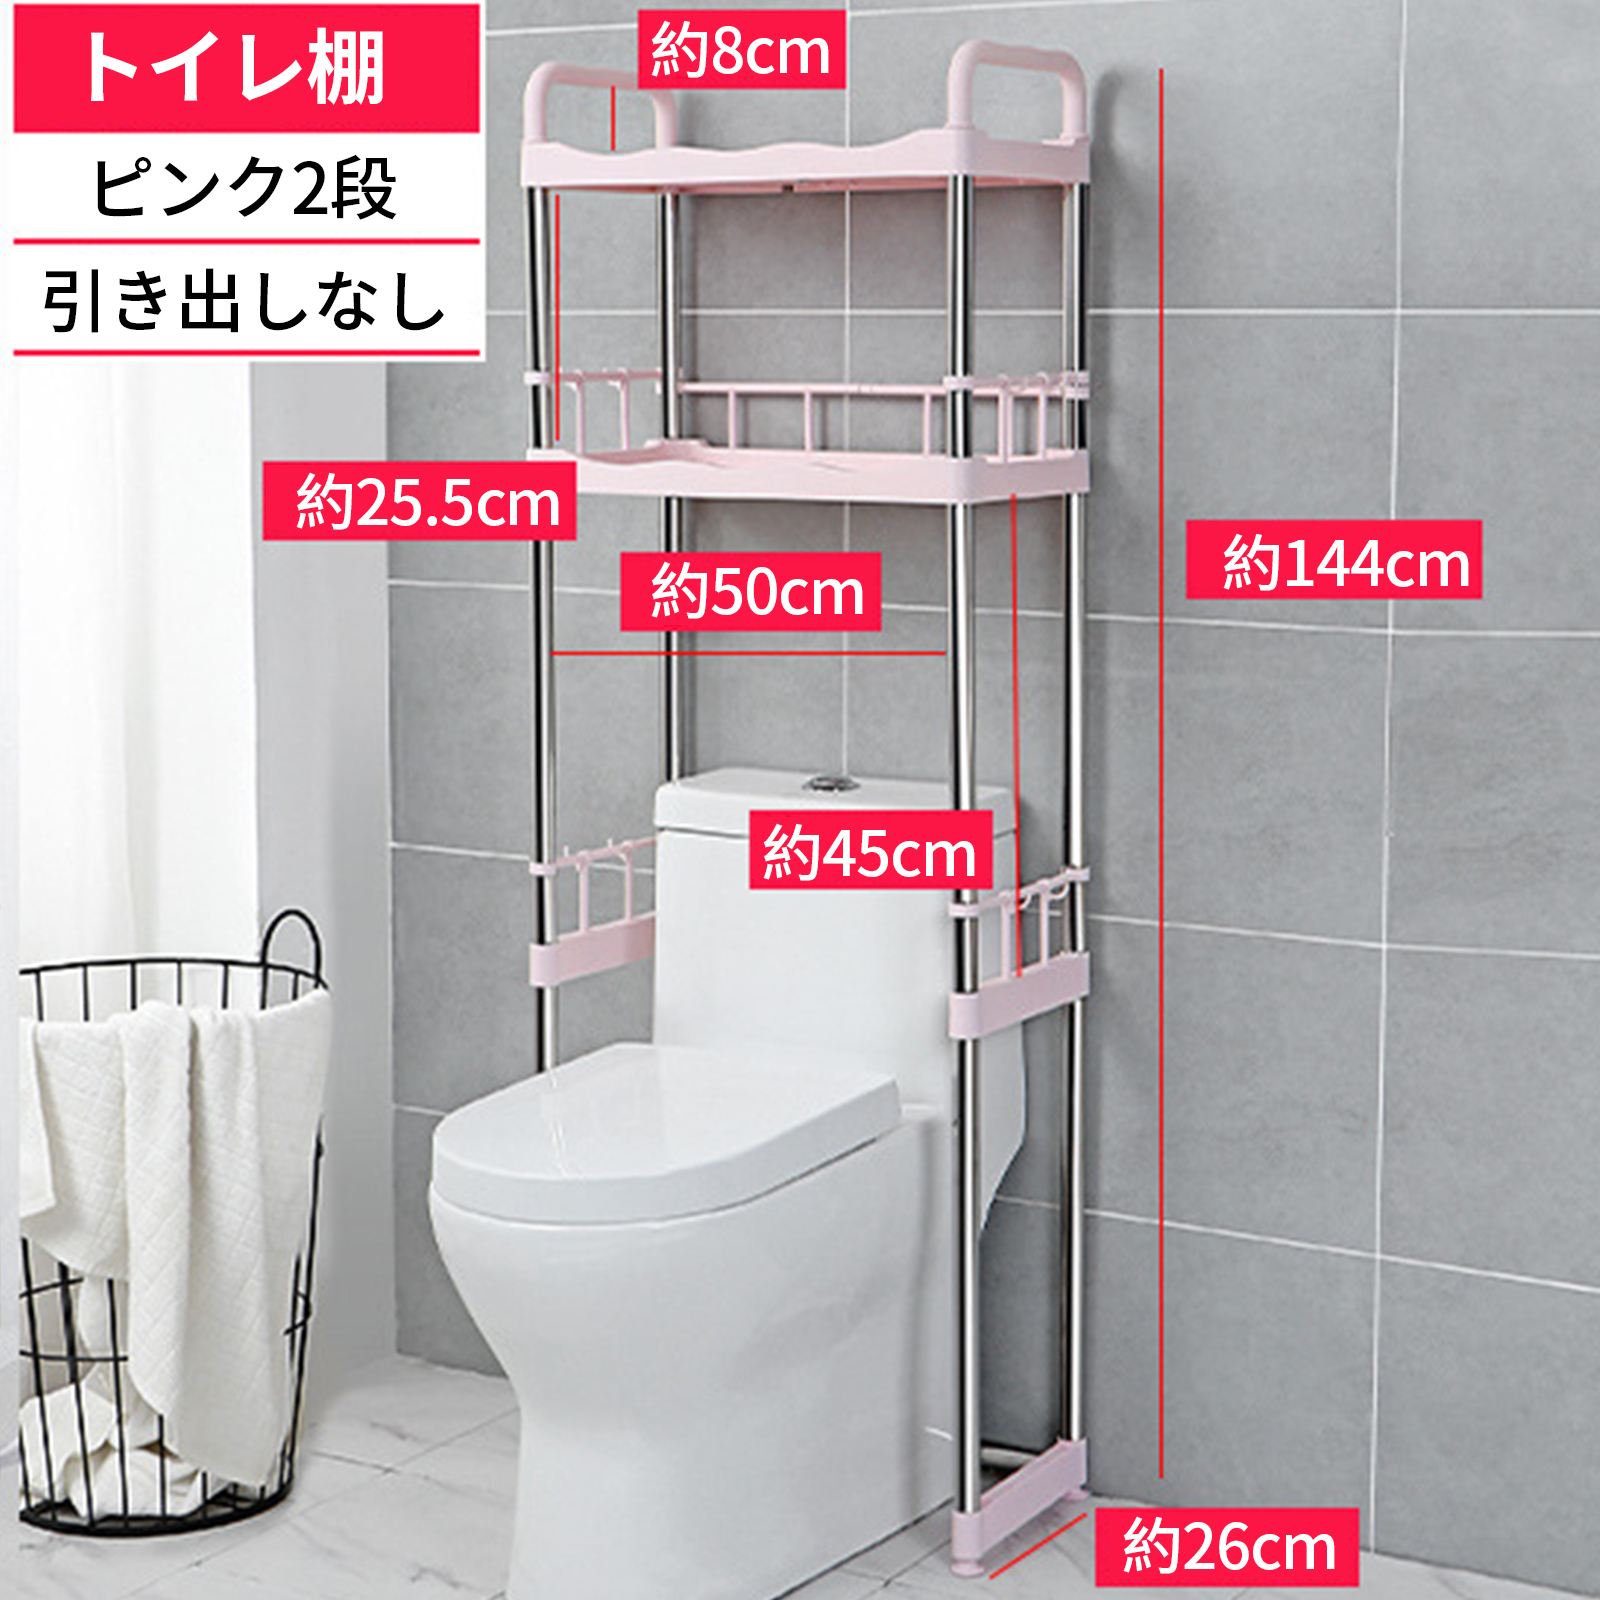 Pink toilet rack [ without drawers ]